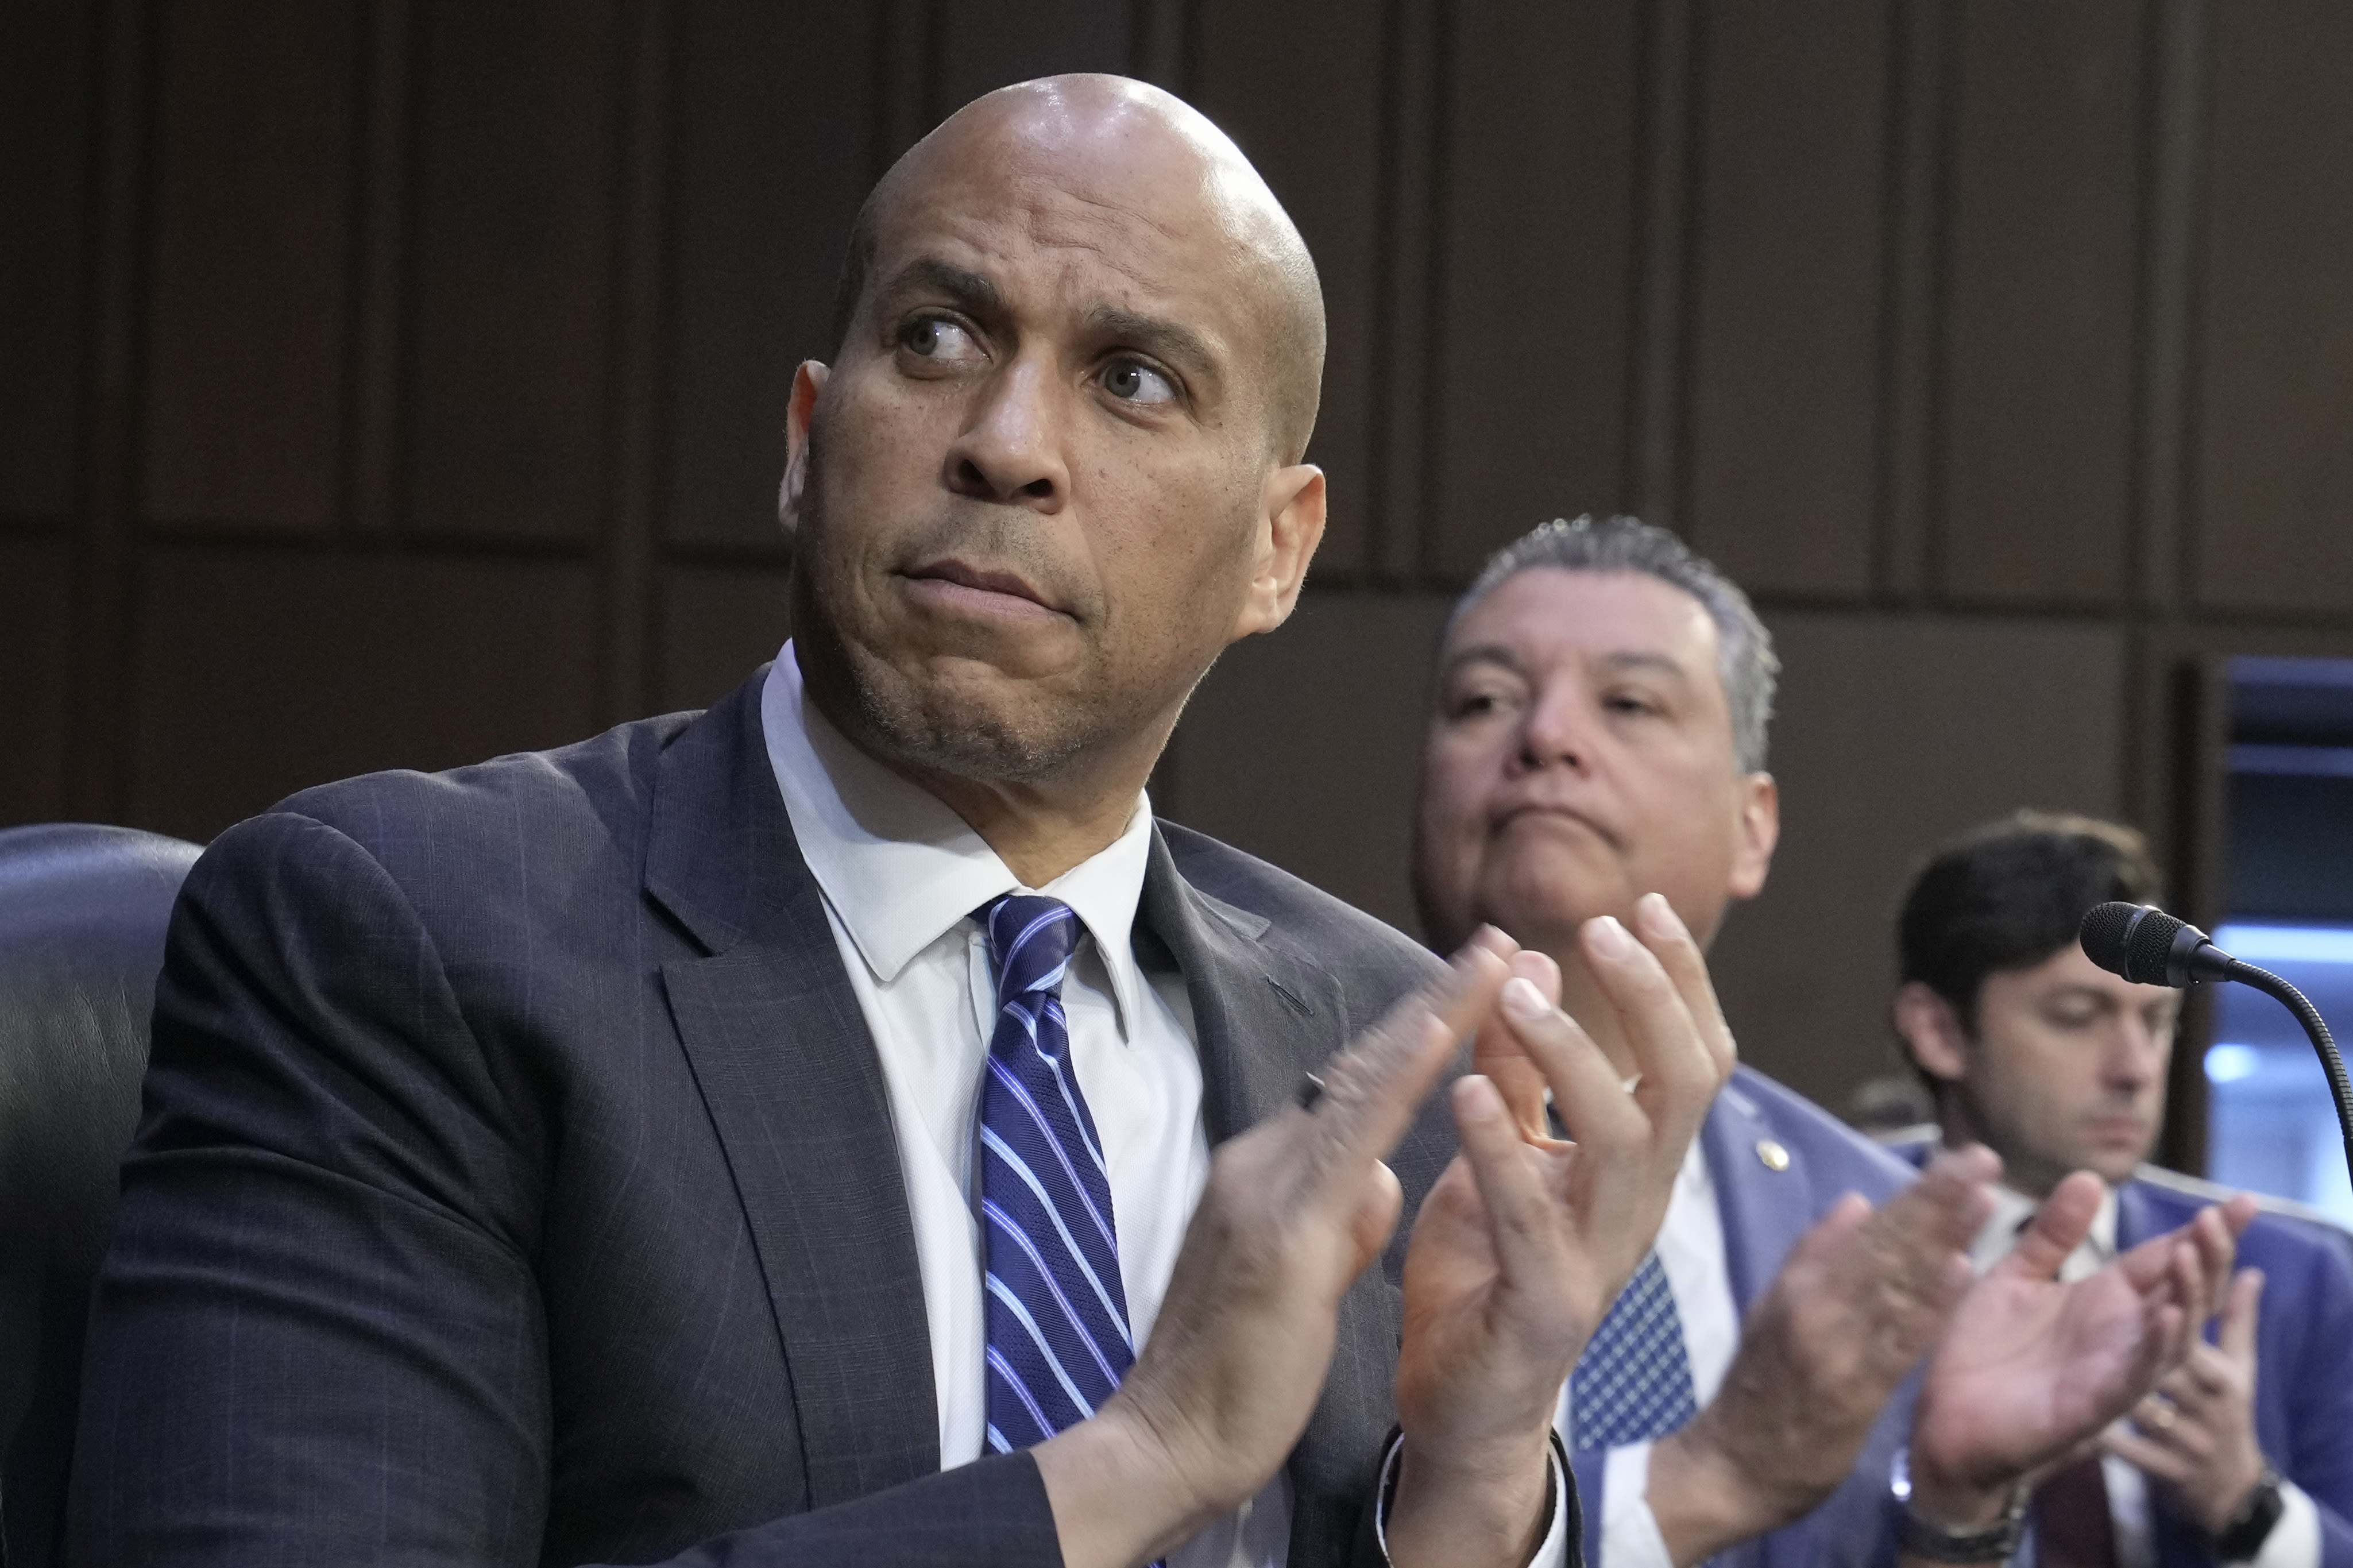 Cory Booker backs Menendez for reelection. Not that one.